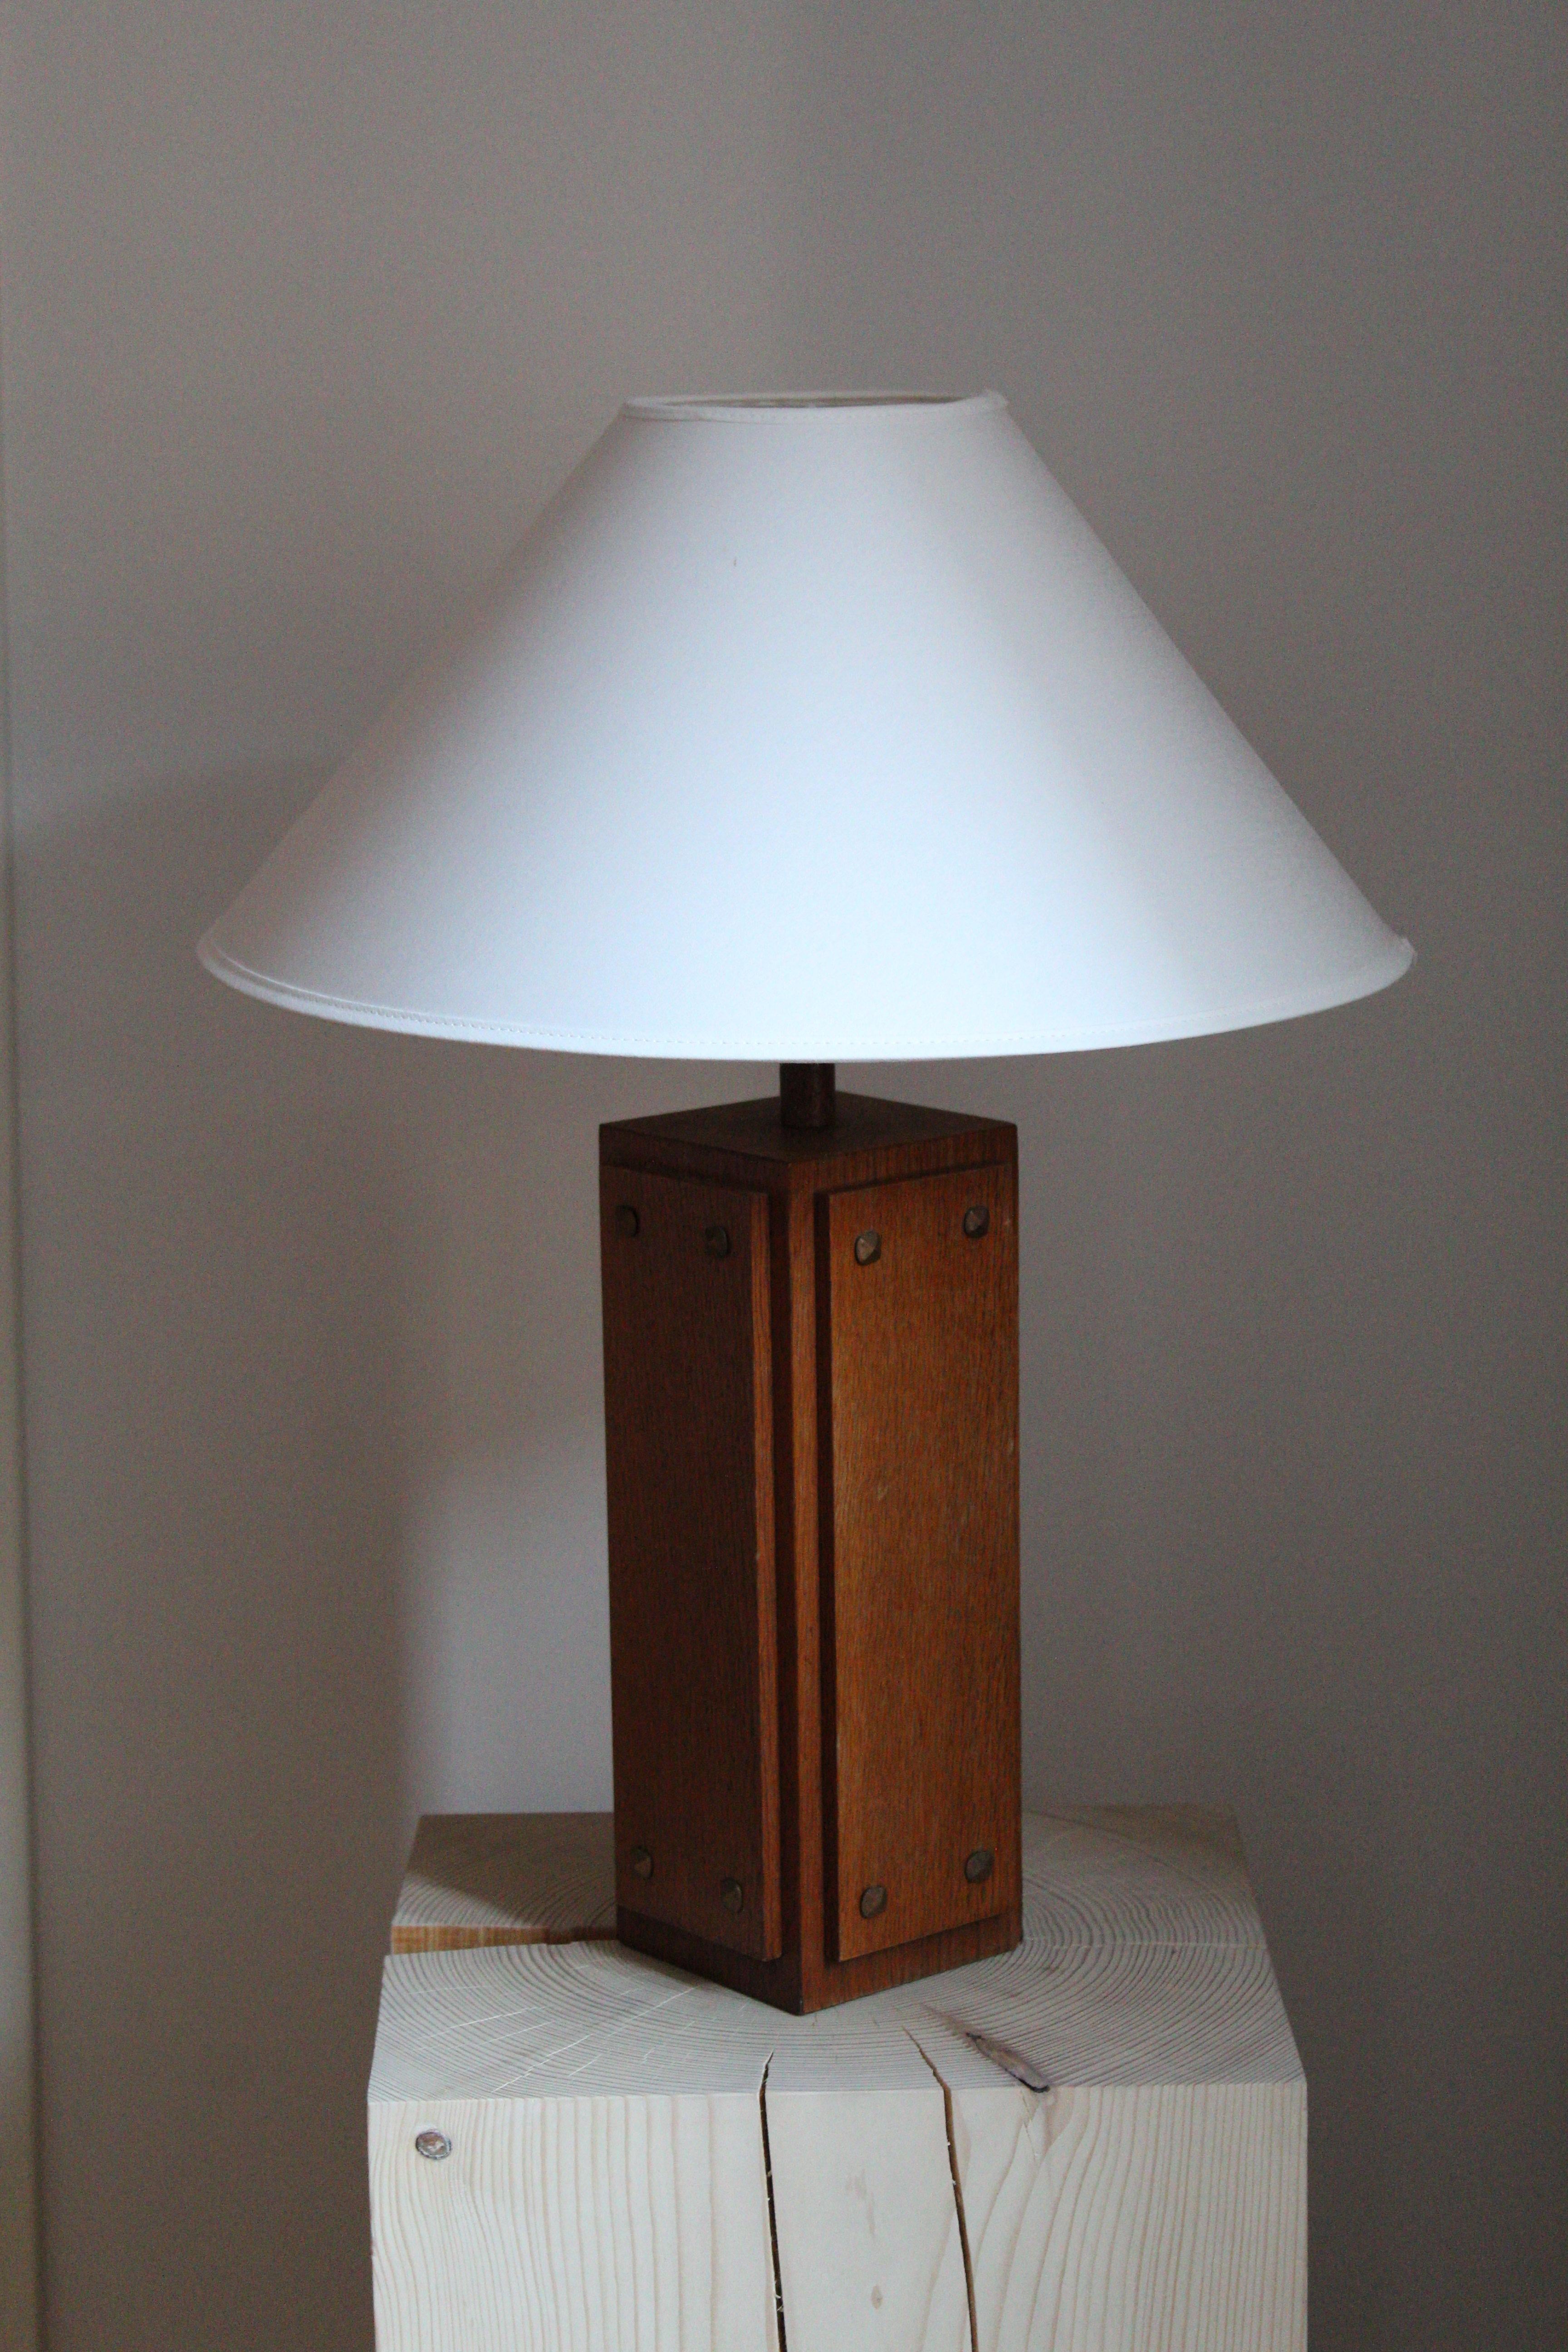 A rare sizable table lamp produced by AB Glas & Trä, Hovmantorp, Sweden. In teak with brass nails. Labeled.

Sold excluding lampshade, stated dimensions excluding lampshade.

Other designers of the period working in the organic style include